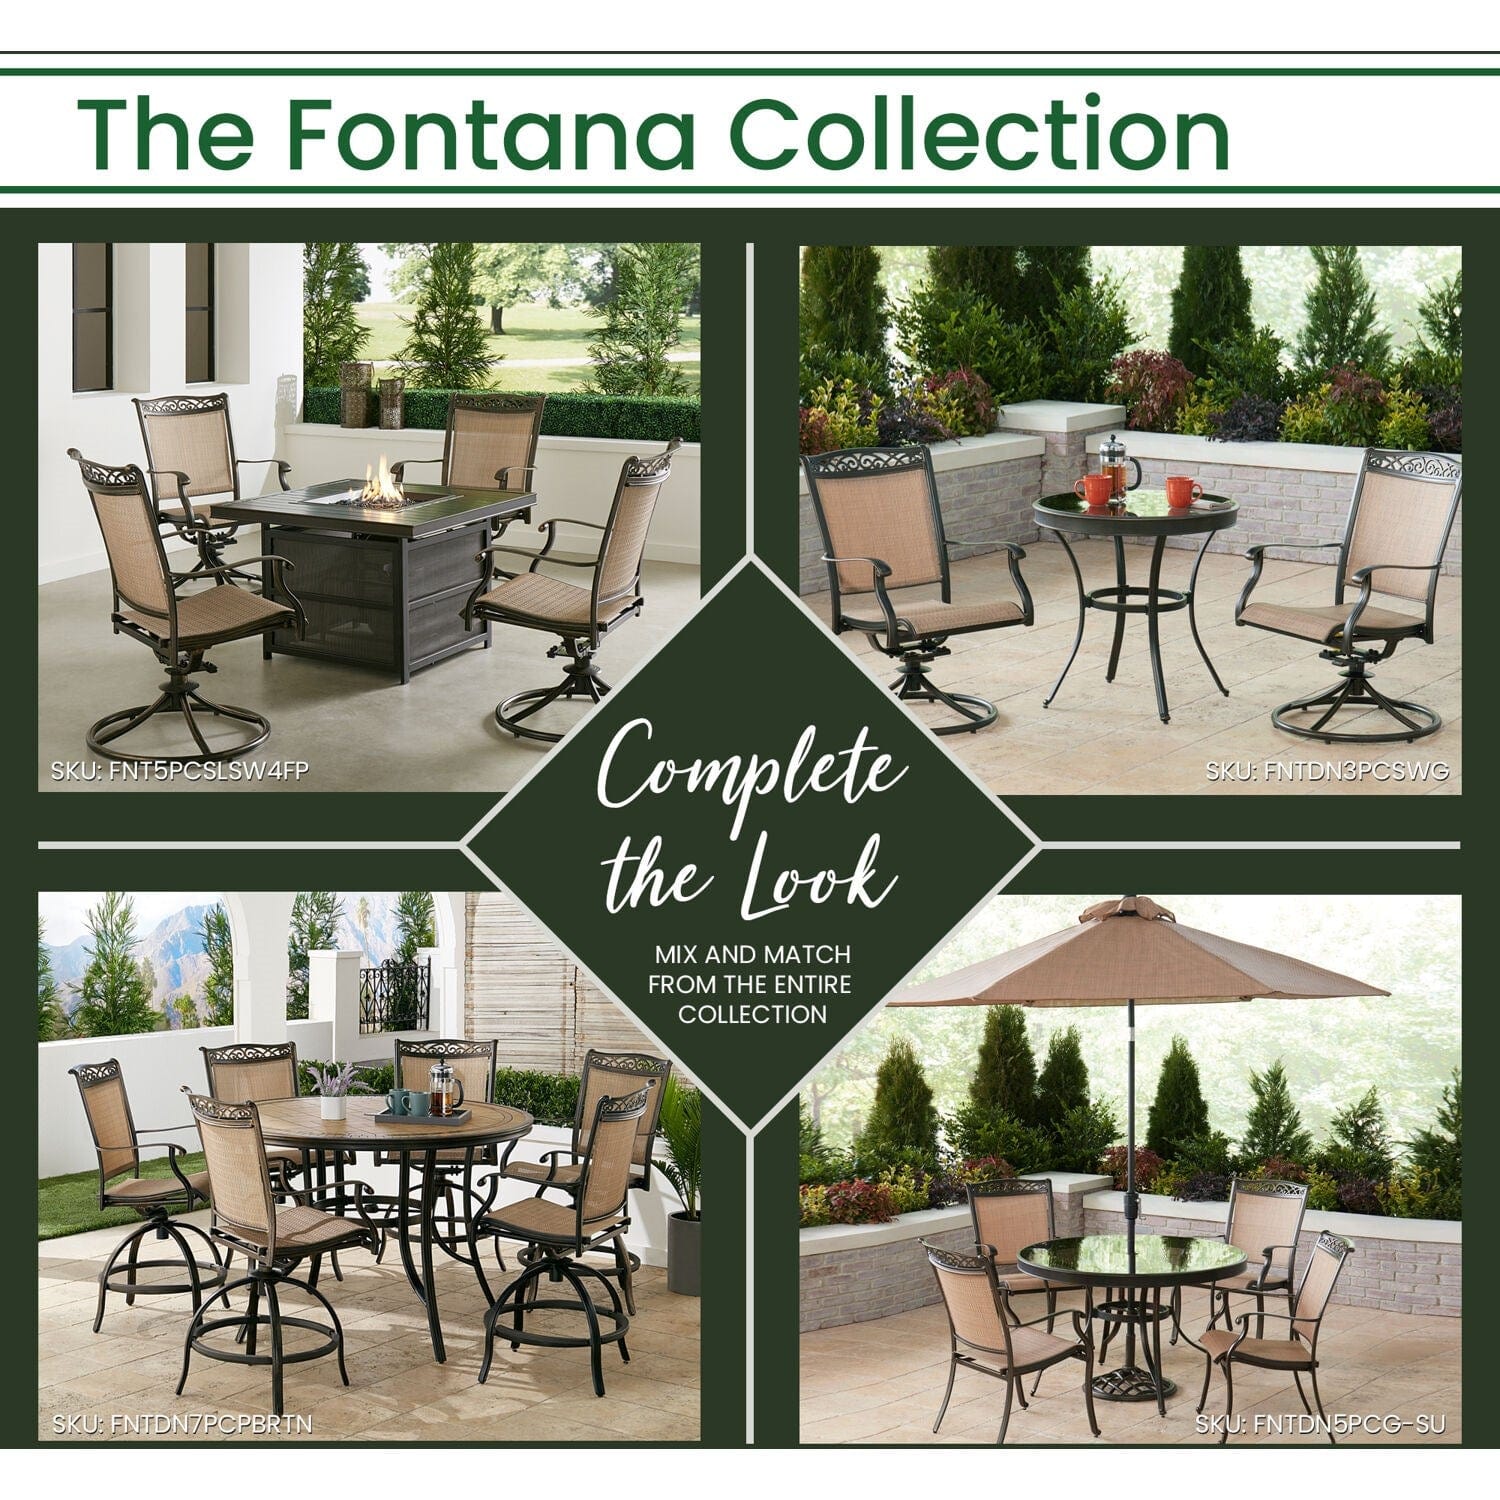 Hanover Fire Pit Dining Set Hanover Fontana 5-Piece High-Dining Set in Tan with 4 Counter-Height Swivel Chairs and a 30,000 BTU Fire Pit Dining Table | FNT5PCPFPBR